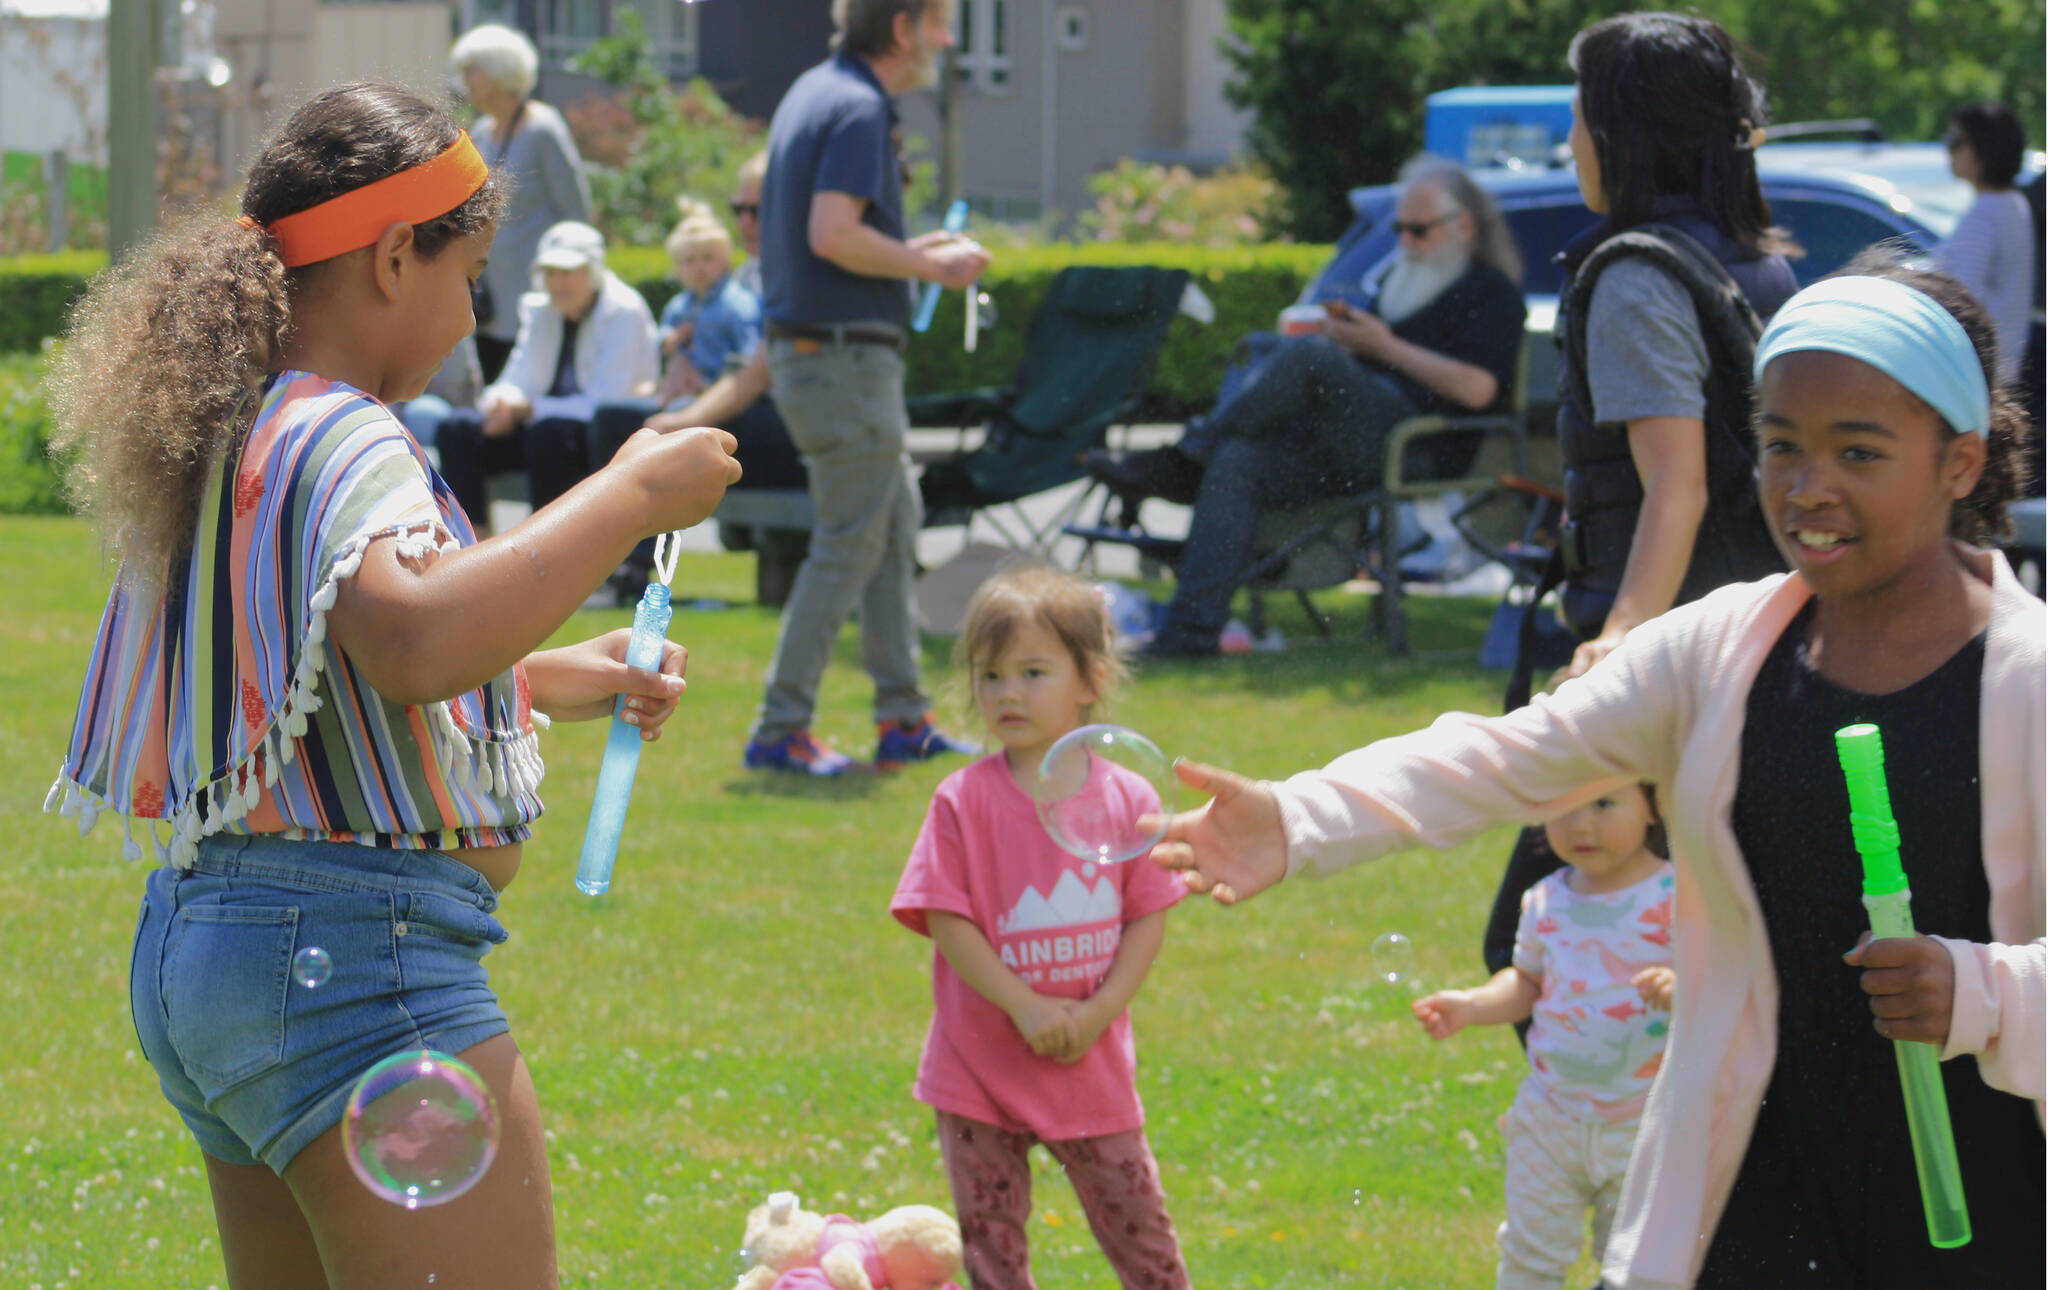 Kids shared bubble wands and chased bubbles around the Winslow Green June 28.